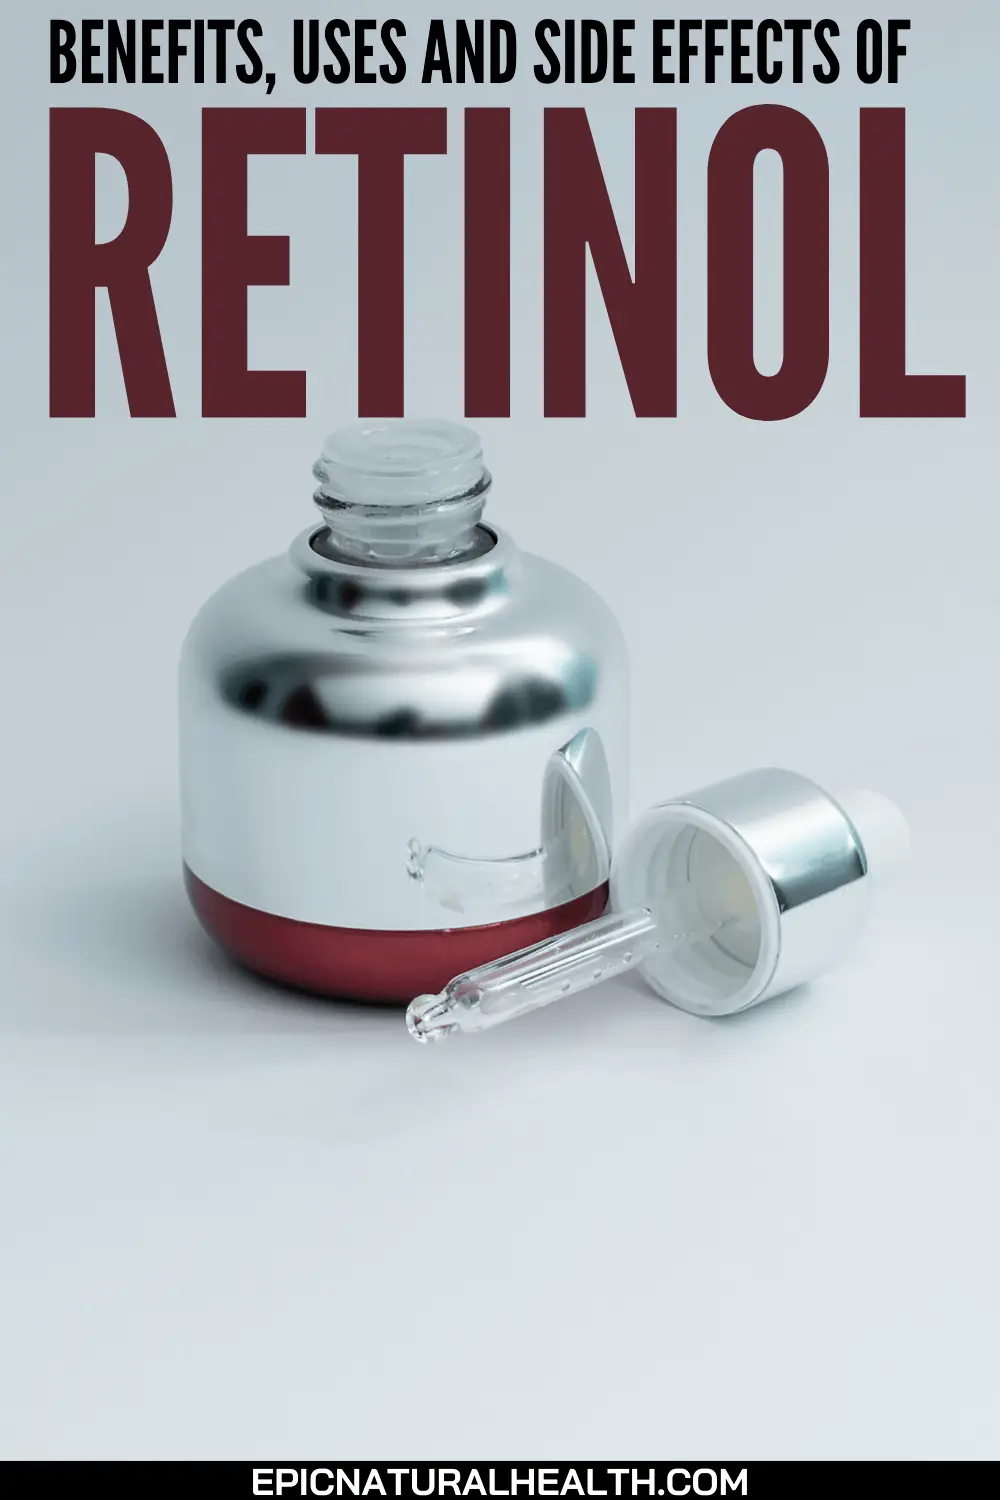 Benefits, uses, and side effects of retinol